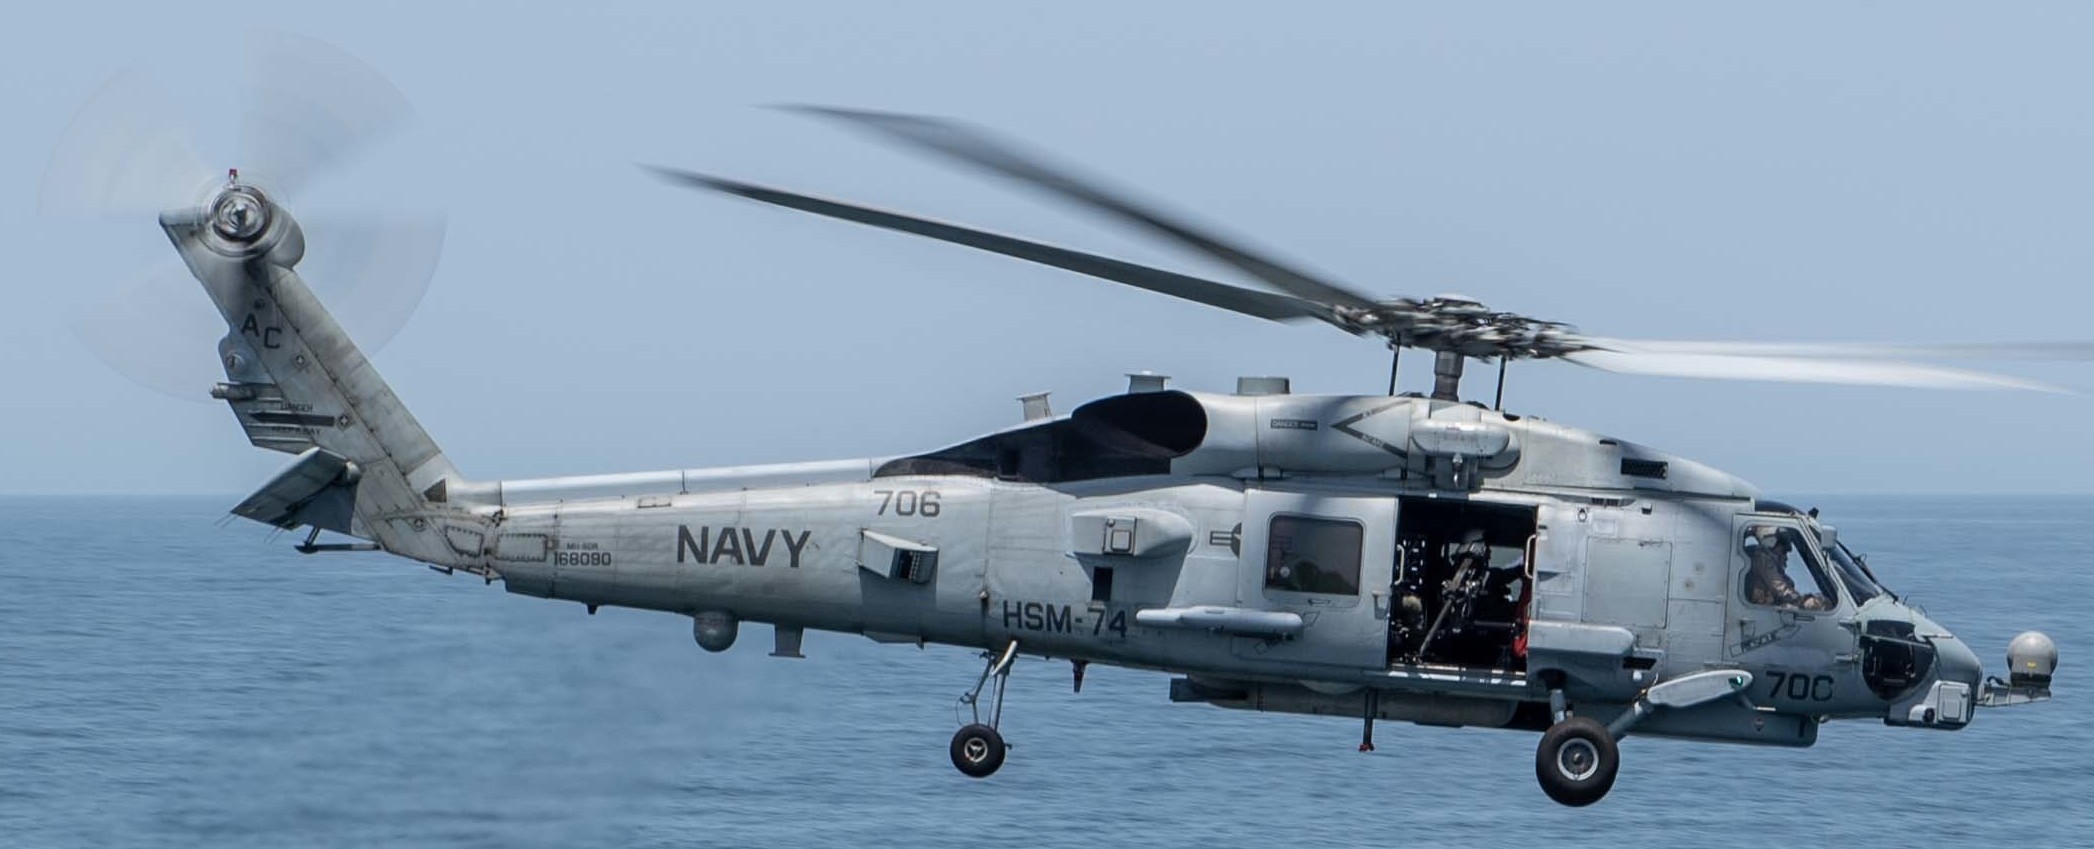 hsm-74 swamp foxes helicopter maritime strike squadron mh-60r seahawk ddg-95 uss james williams 104